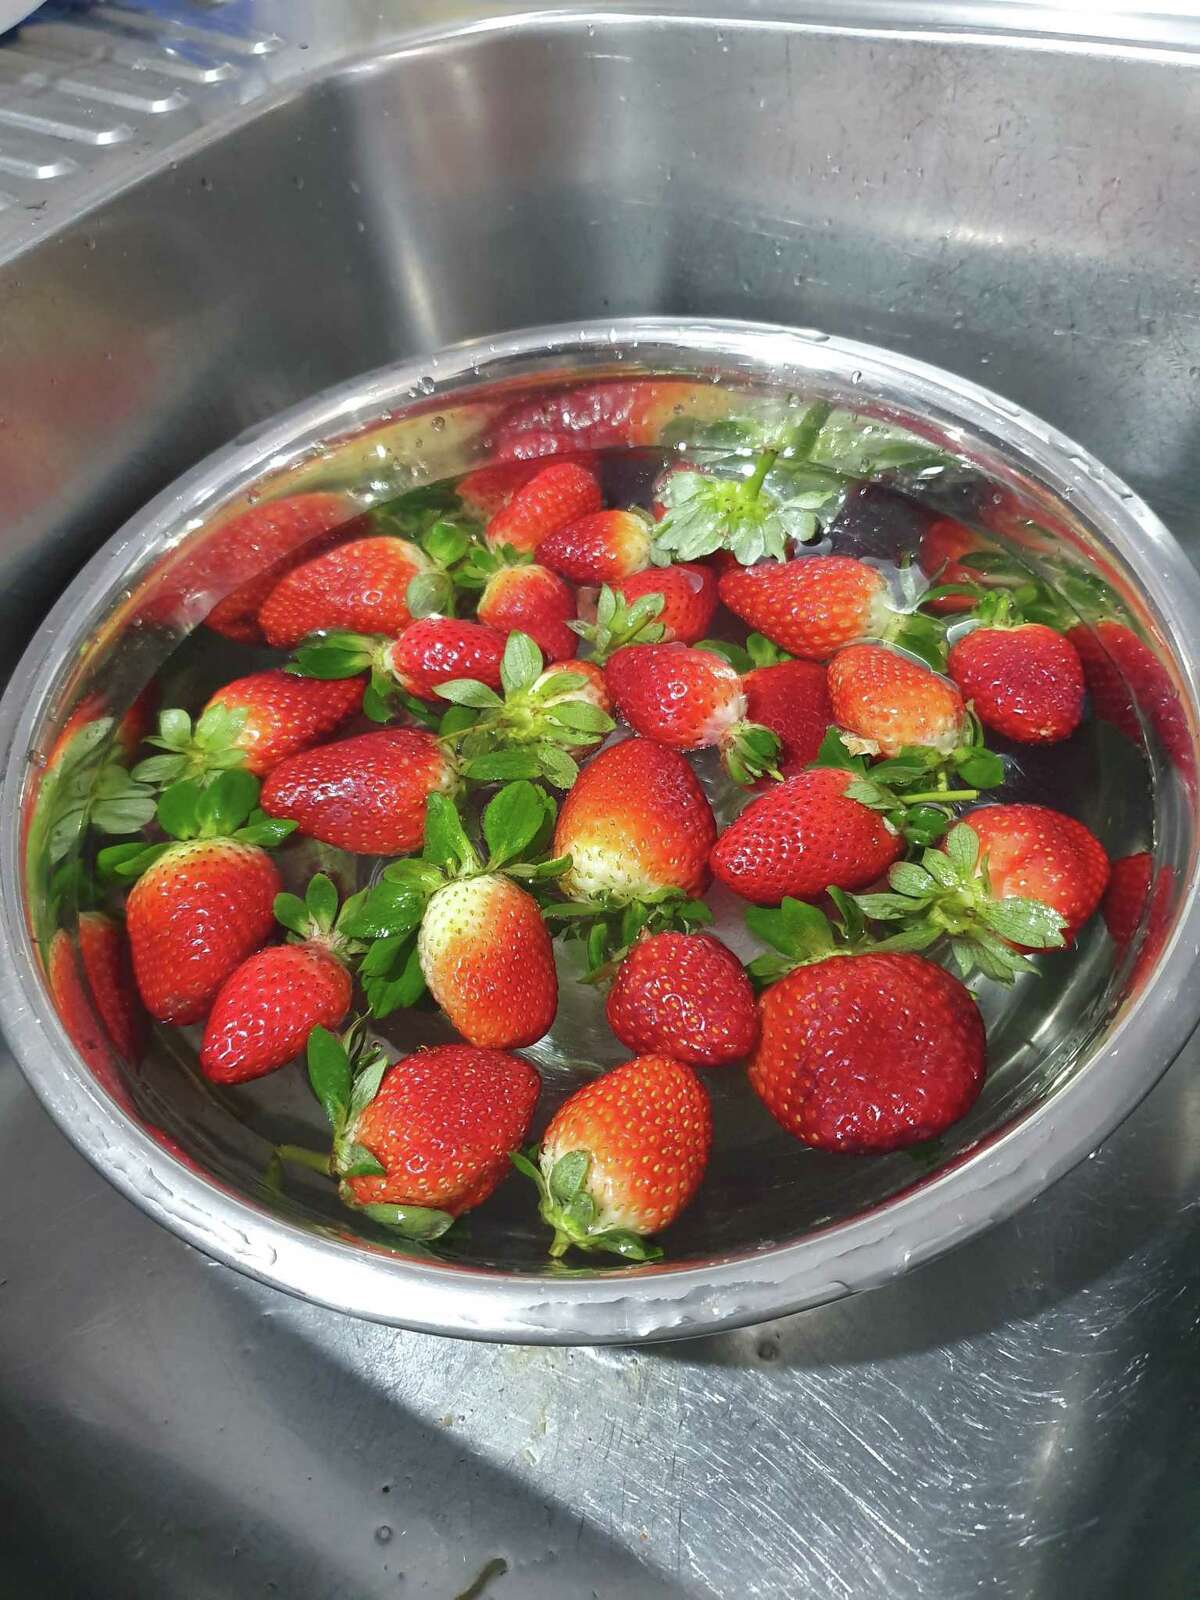 Dunking strawberries in a bath of water and vinegar before refrigerating can stretch their life to a week or more.